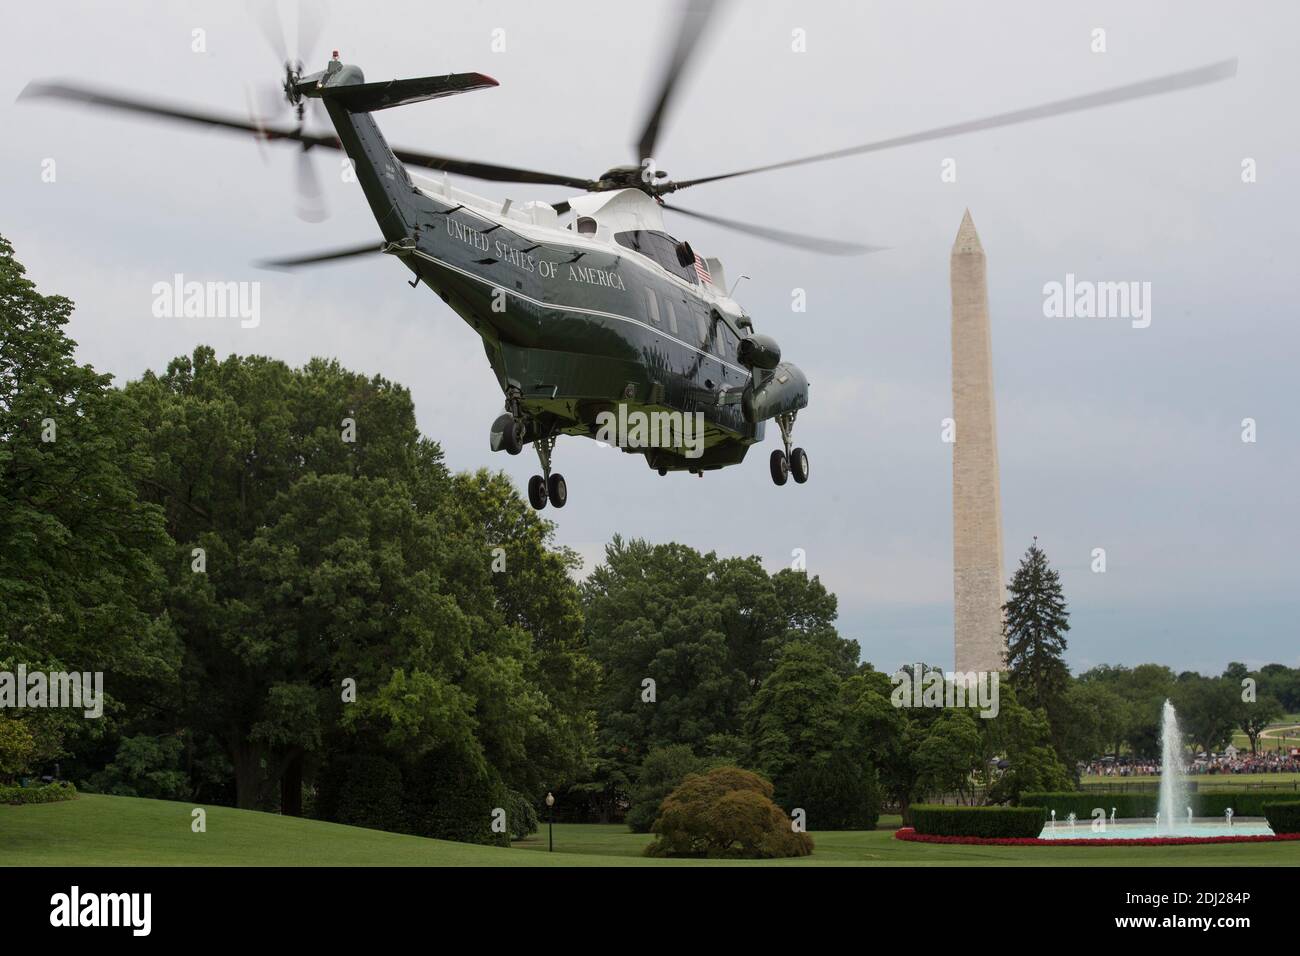 U.S. President Barack Obama aboard Marine One, departs the White House for San Jose, California in Washington, DC, USA, 23 June 2016. While in San Jose, Obama will attend the Global Entrepreneurship Summit with Facebook co-founder and CEO Mark Zuckerberg. Photo by Molly Ryley/Pool/ABACAPRESS.COM Stock Photo